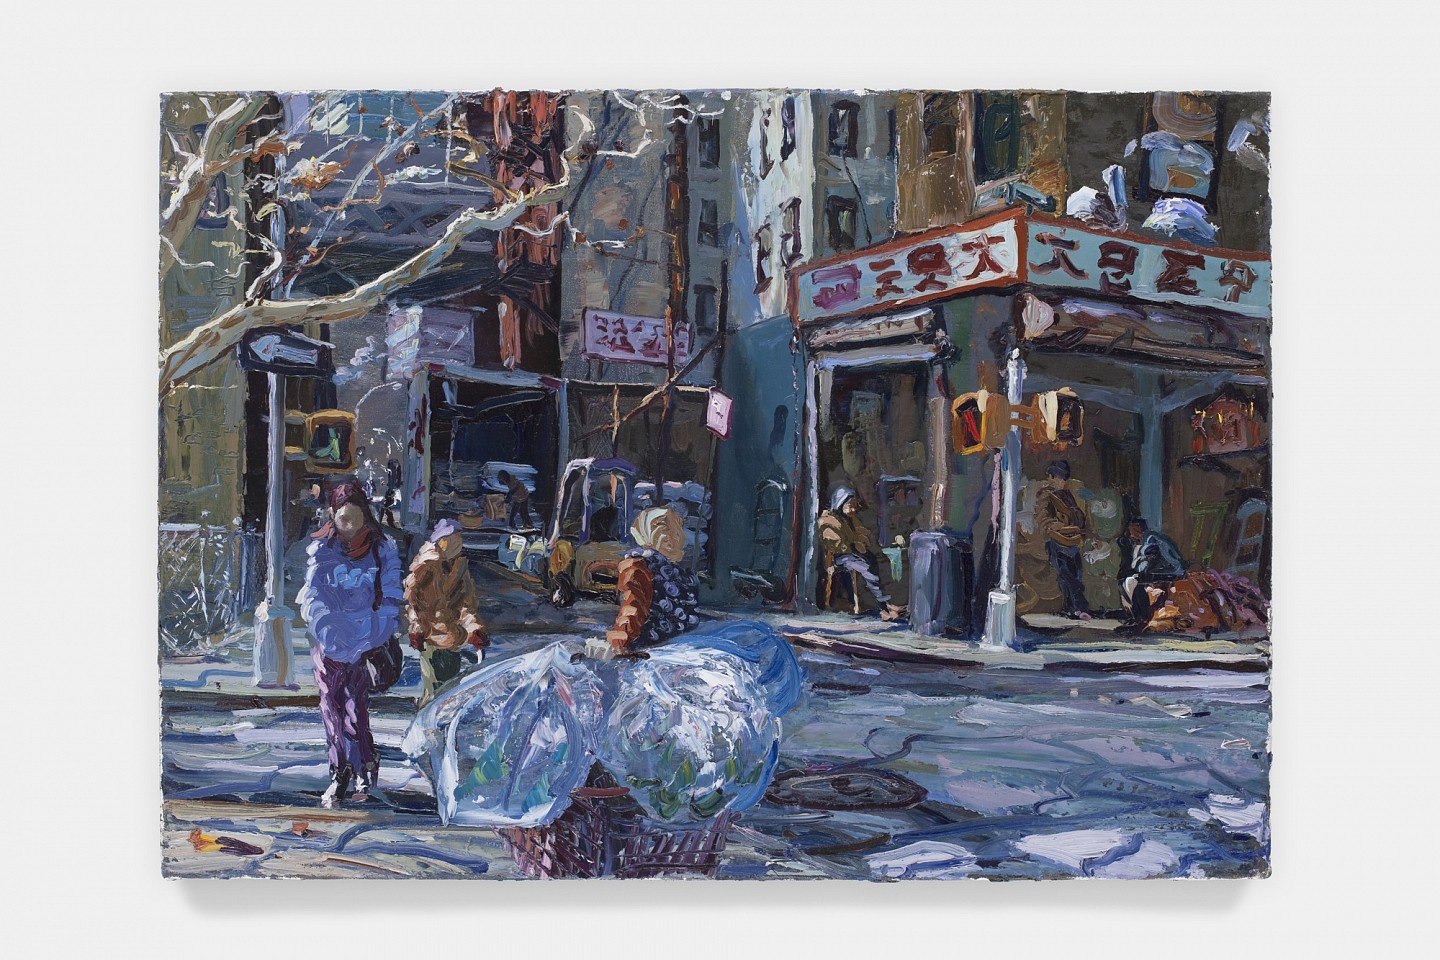 Neil Berger
Chinatown, 2009
oil on canvas, 22 x 32 in.